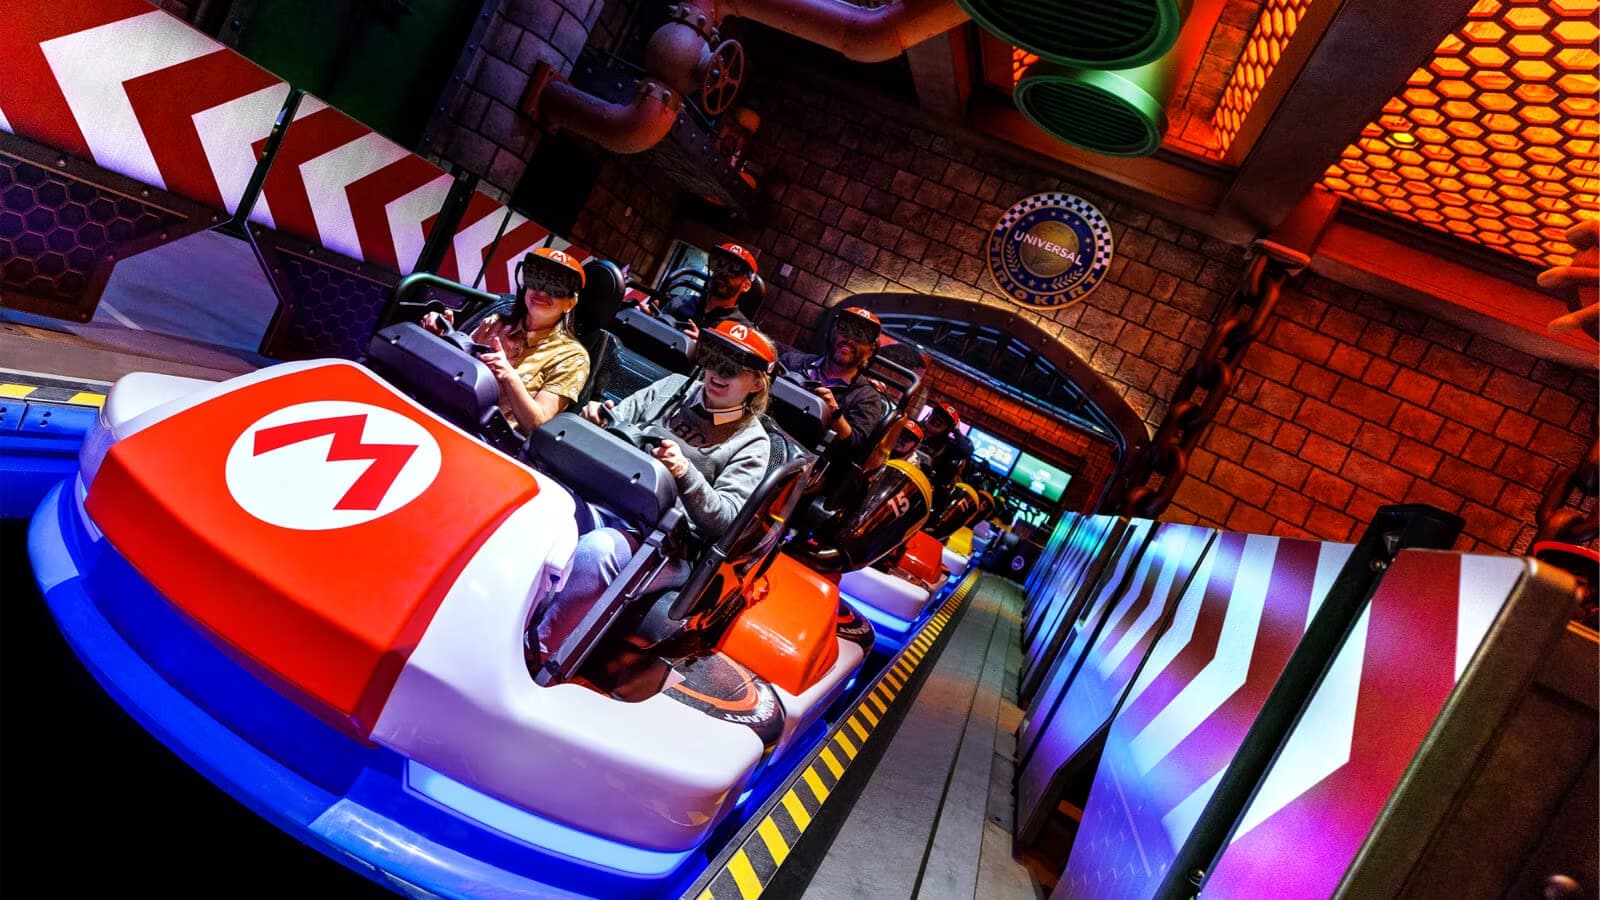 Families sitting in Mario Kart-like go karts ready to race in Mario Kart: Bowser's Challenge at Super Nintendo World in Universal Studios Hollywood. Attendees are seated four to a go-kart and are waring headsets as part of the ride. They are on a track that is similar to Bowser's Castle from Super Mario.